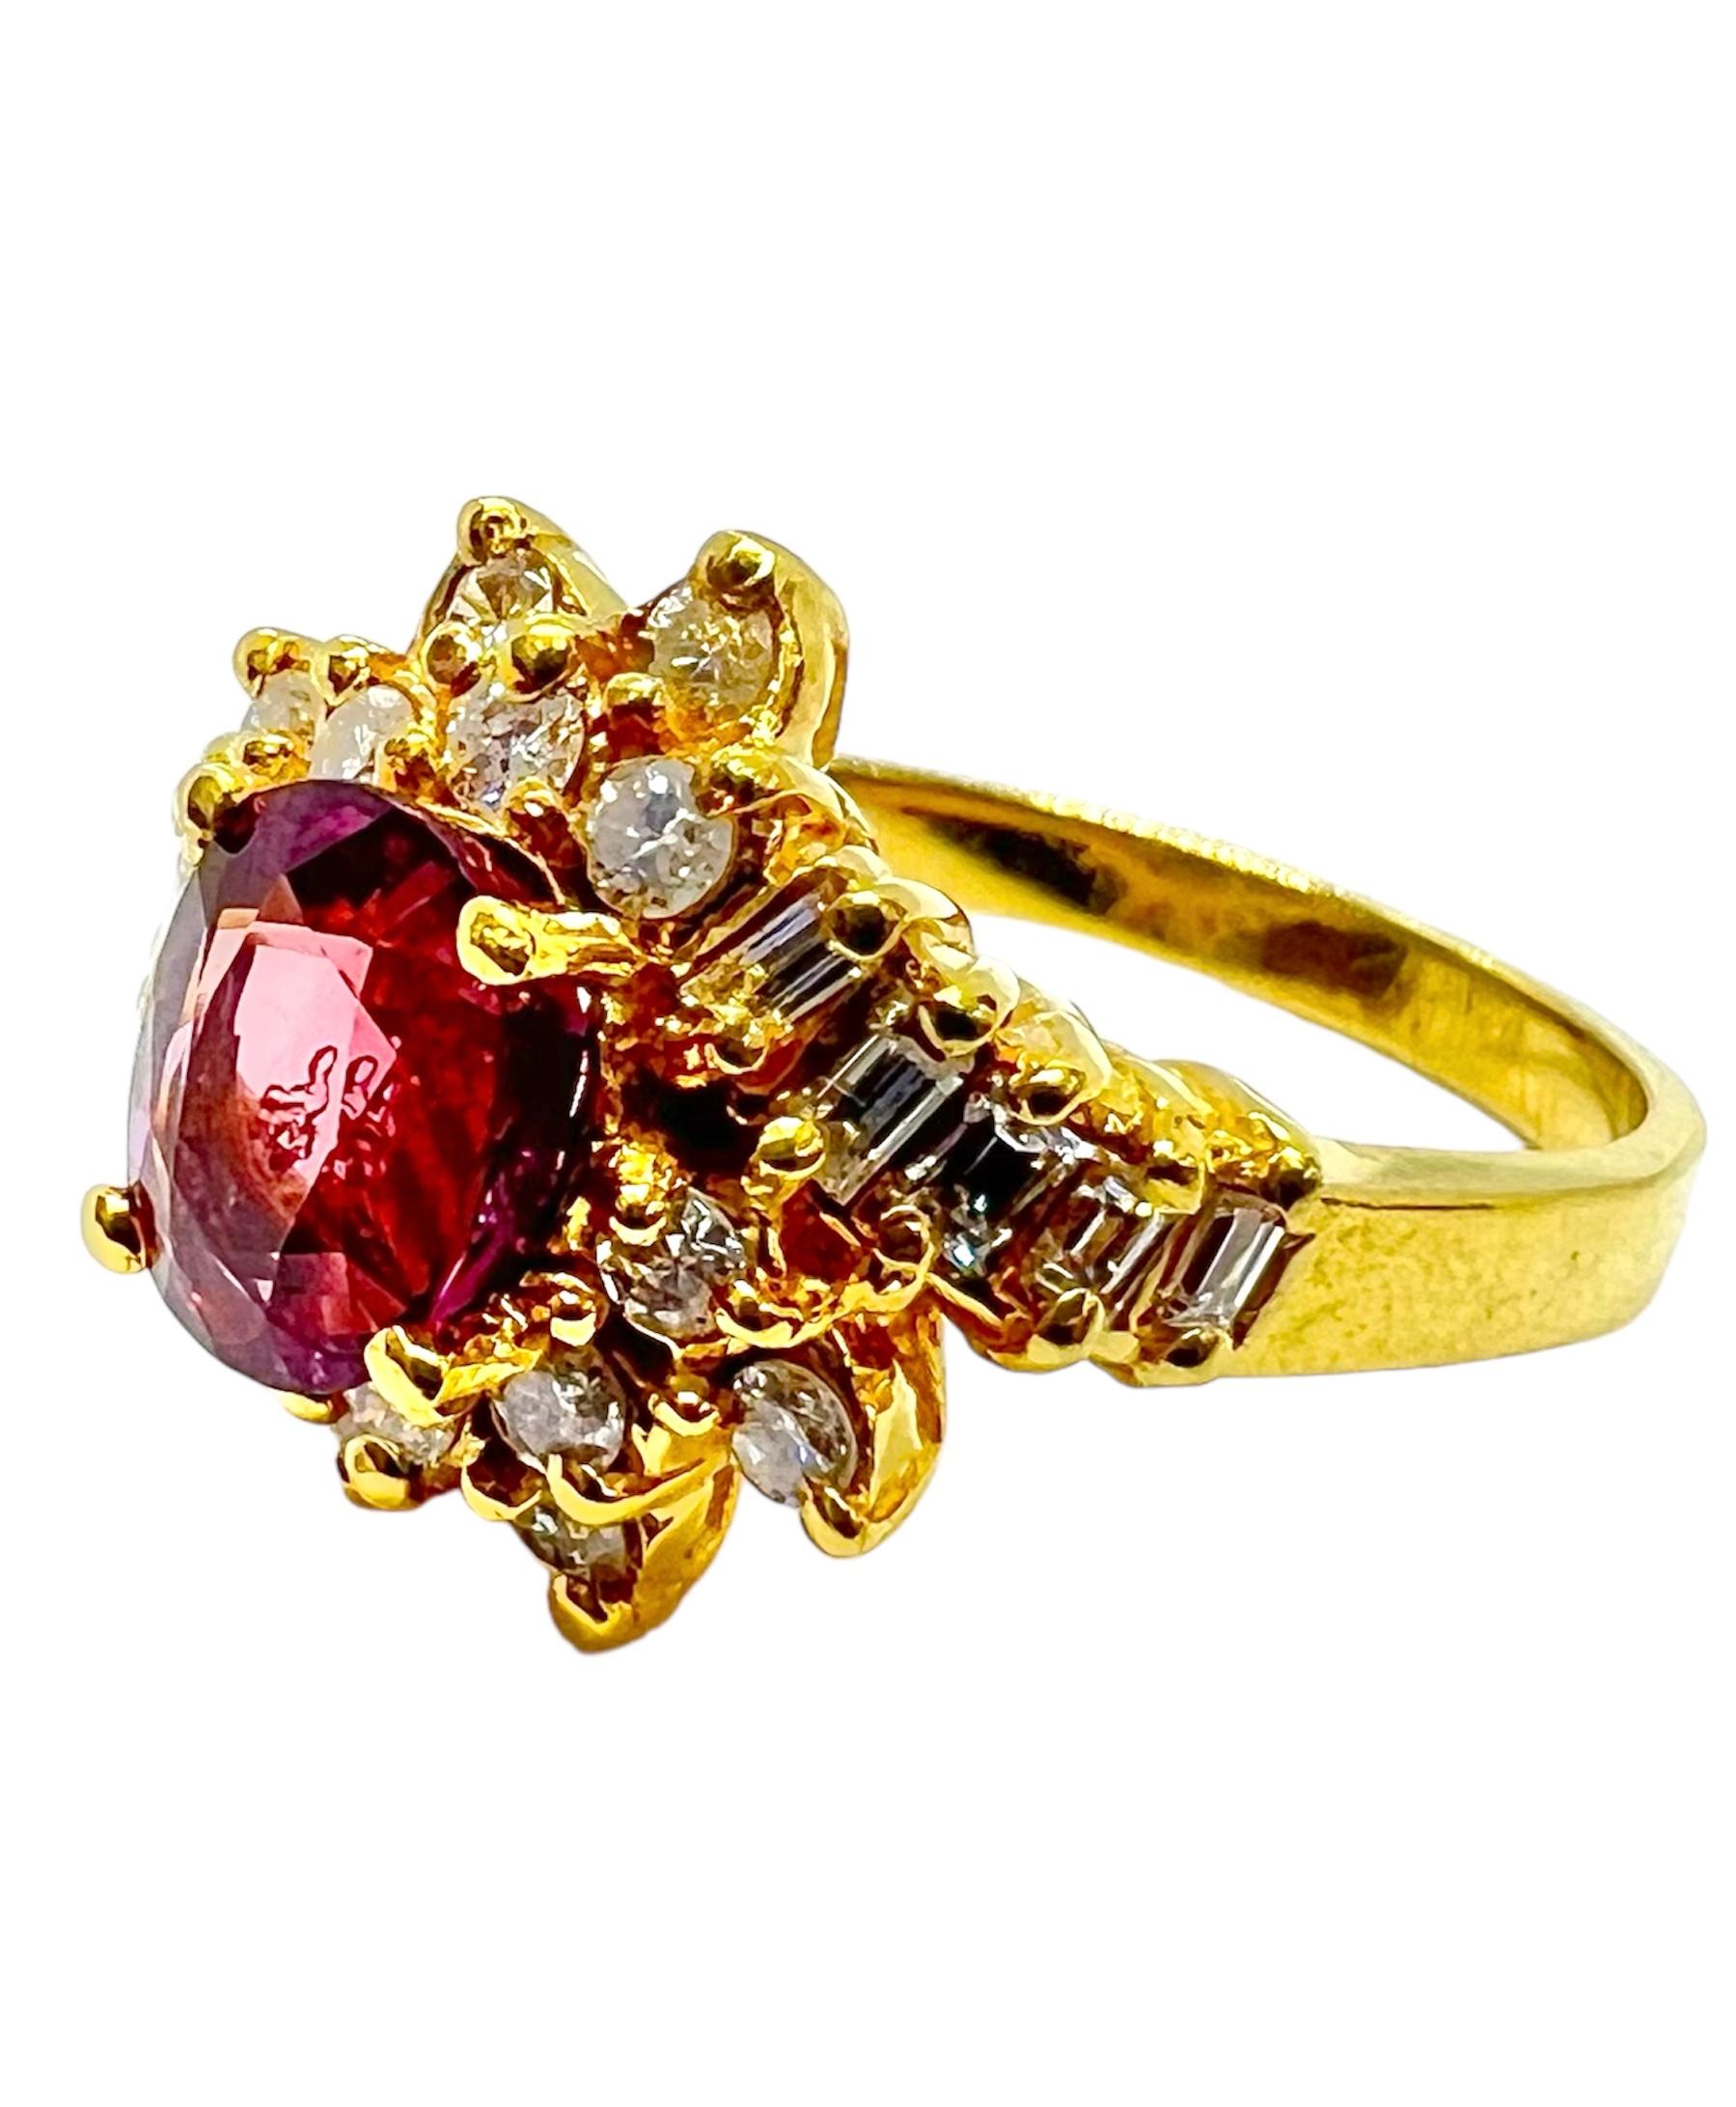 18K yellow gold ring with ruby center stone accentuated with diamonds.

Sophia D by Joseph Dardashti LTD has been known worldwide for 35 years and are inspired by classic Art Deco design that merges with modern manufacturing techniques.  